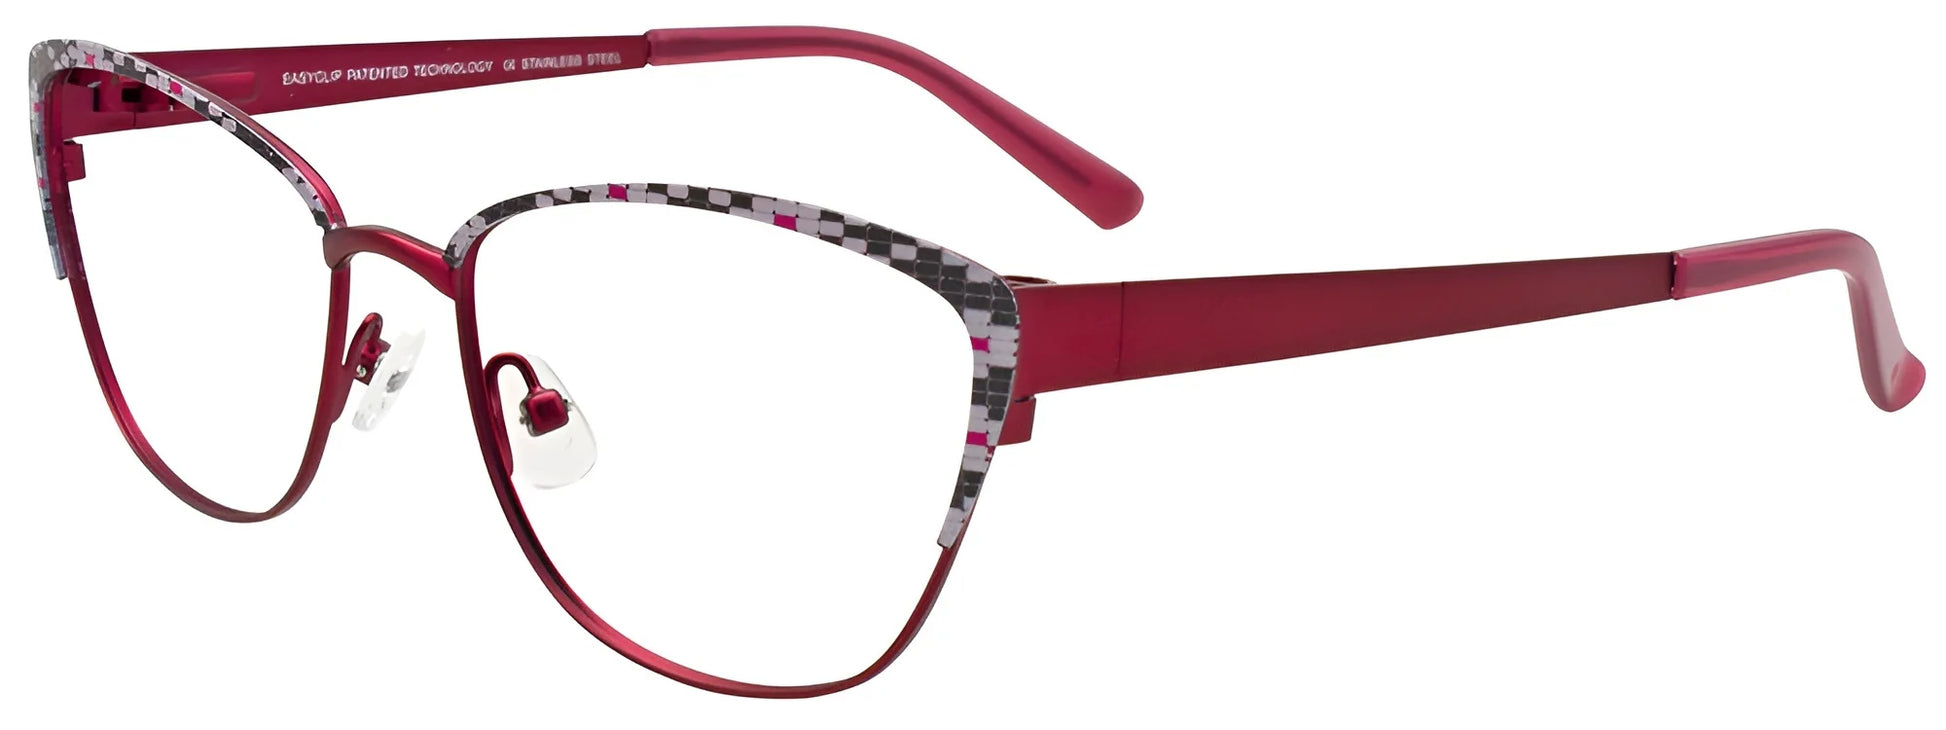 EasyClip EC482 Eyeglasses with Clip-on Sunglasses Satin Red & Black & White & Pink